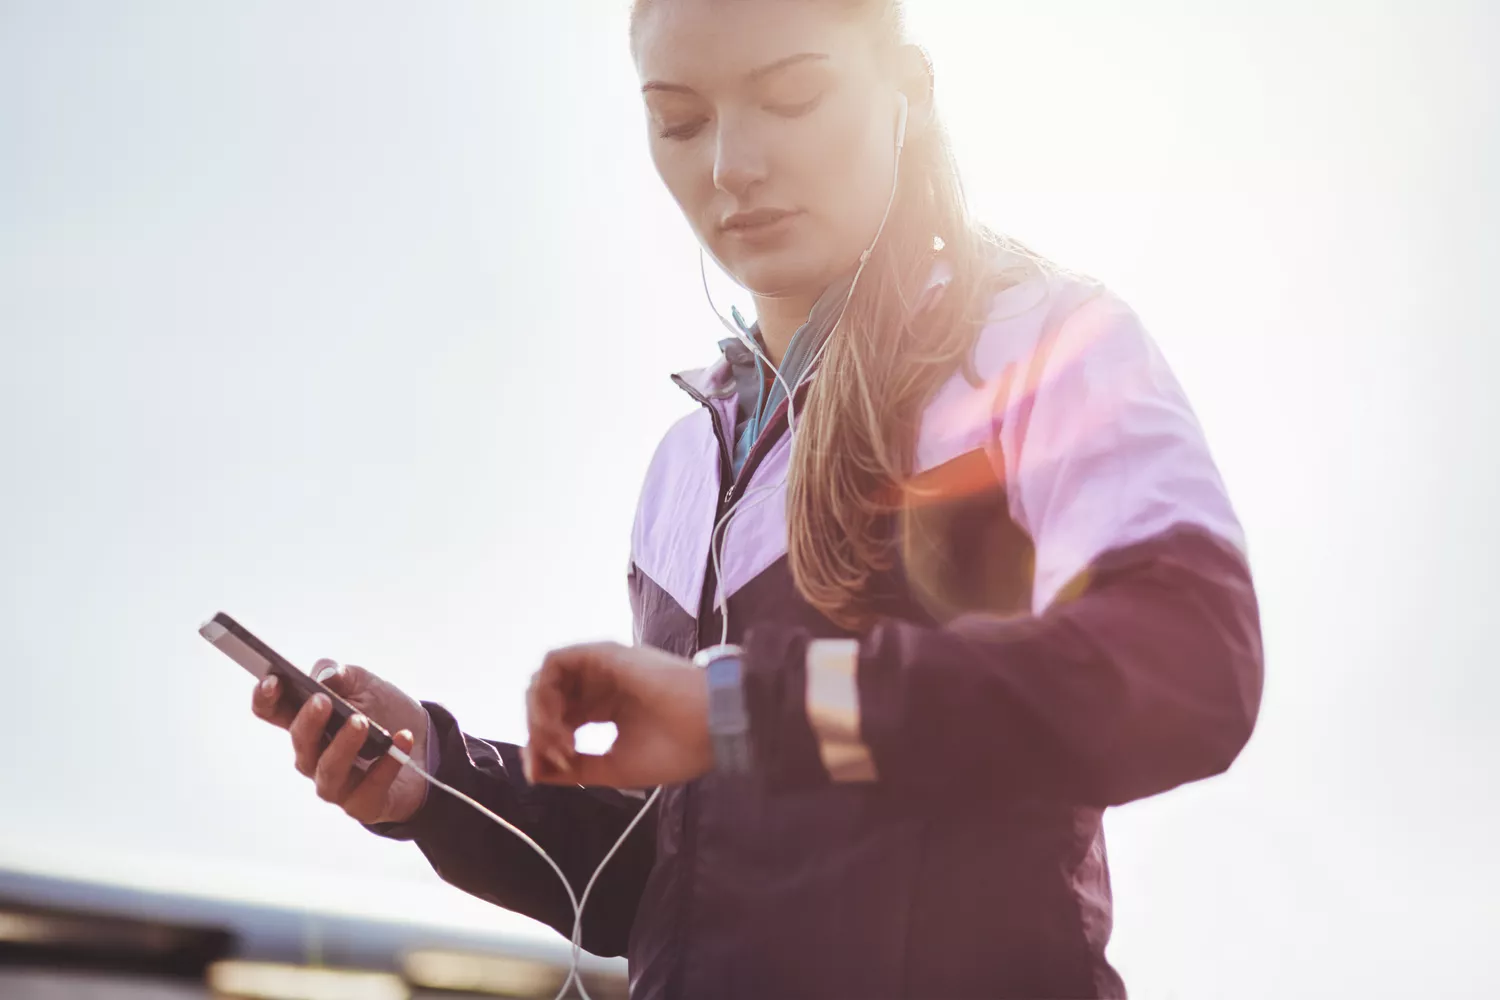 Runner wearing earphones checking time on smartwatch